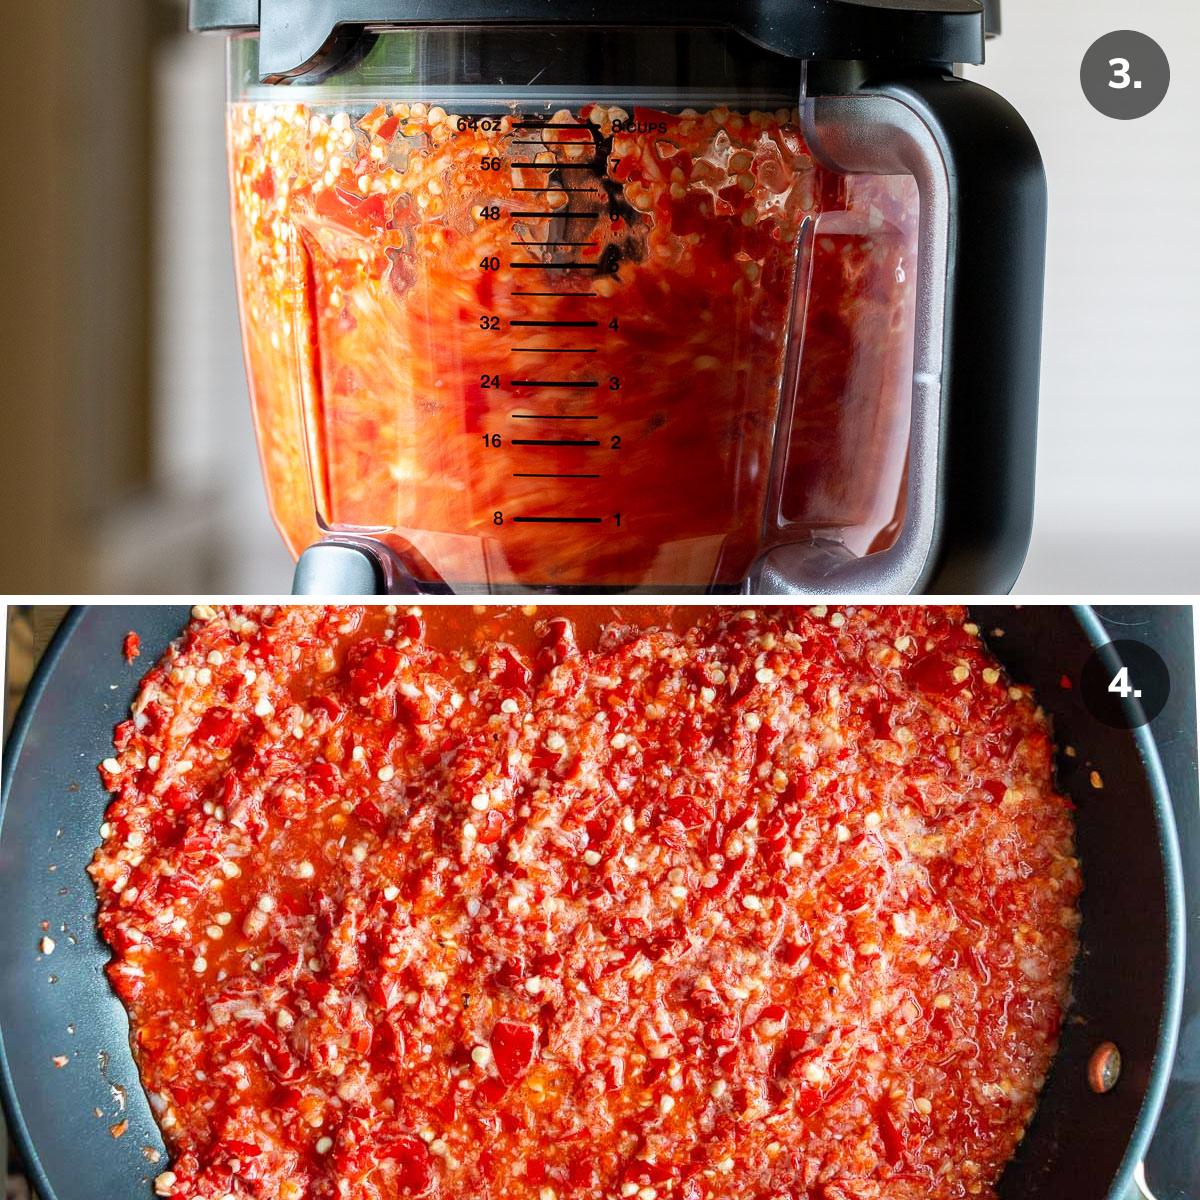 Pureeing garlic chili sauce in a blender and transferred into a pan.